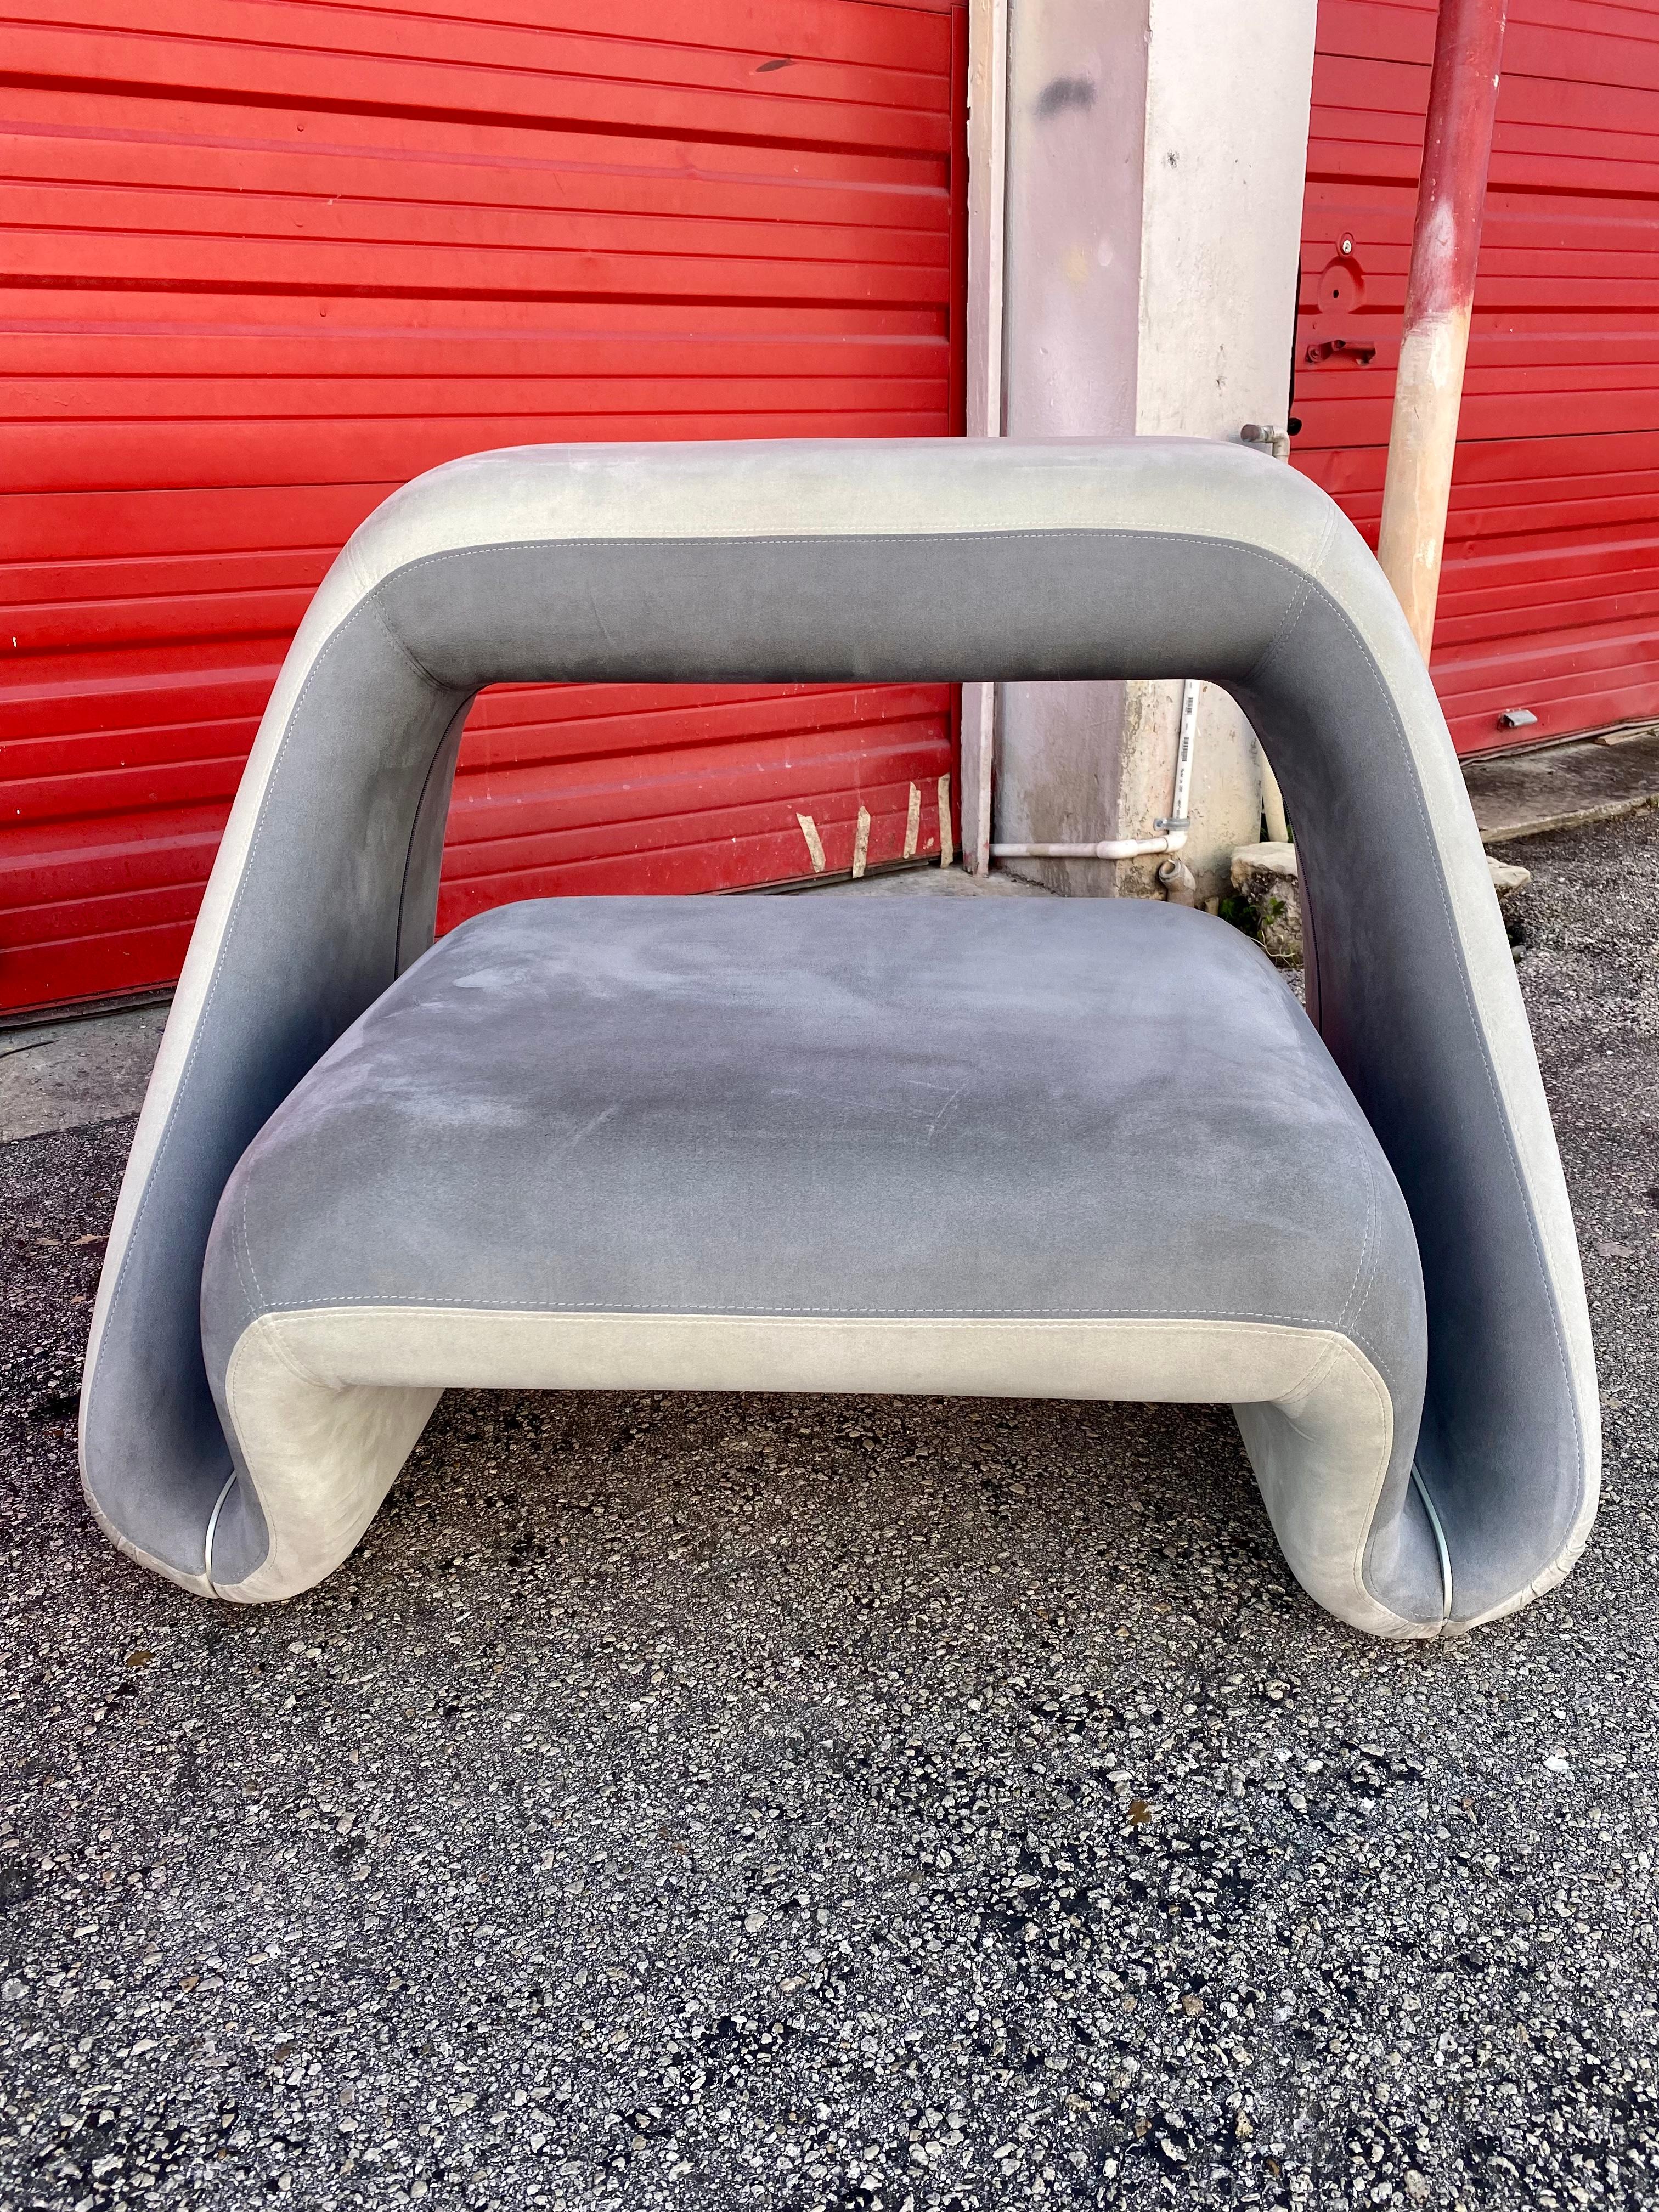 Extremely rare Fabio Novembre for Meritalia sculptural chairs. The beautiful set in dark and light gray ultra suede is statement piece which is also extremely comfortable and packed with personality! The fabulous chairs of the Air Lounge System are